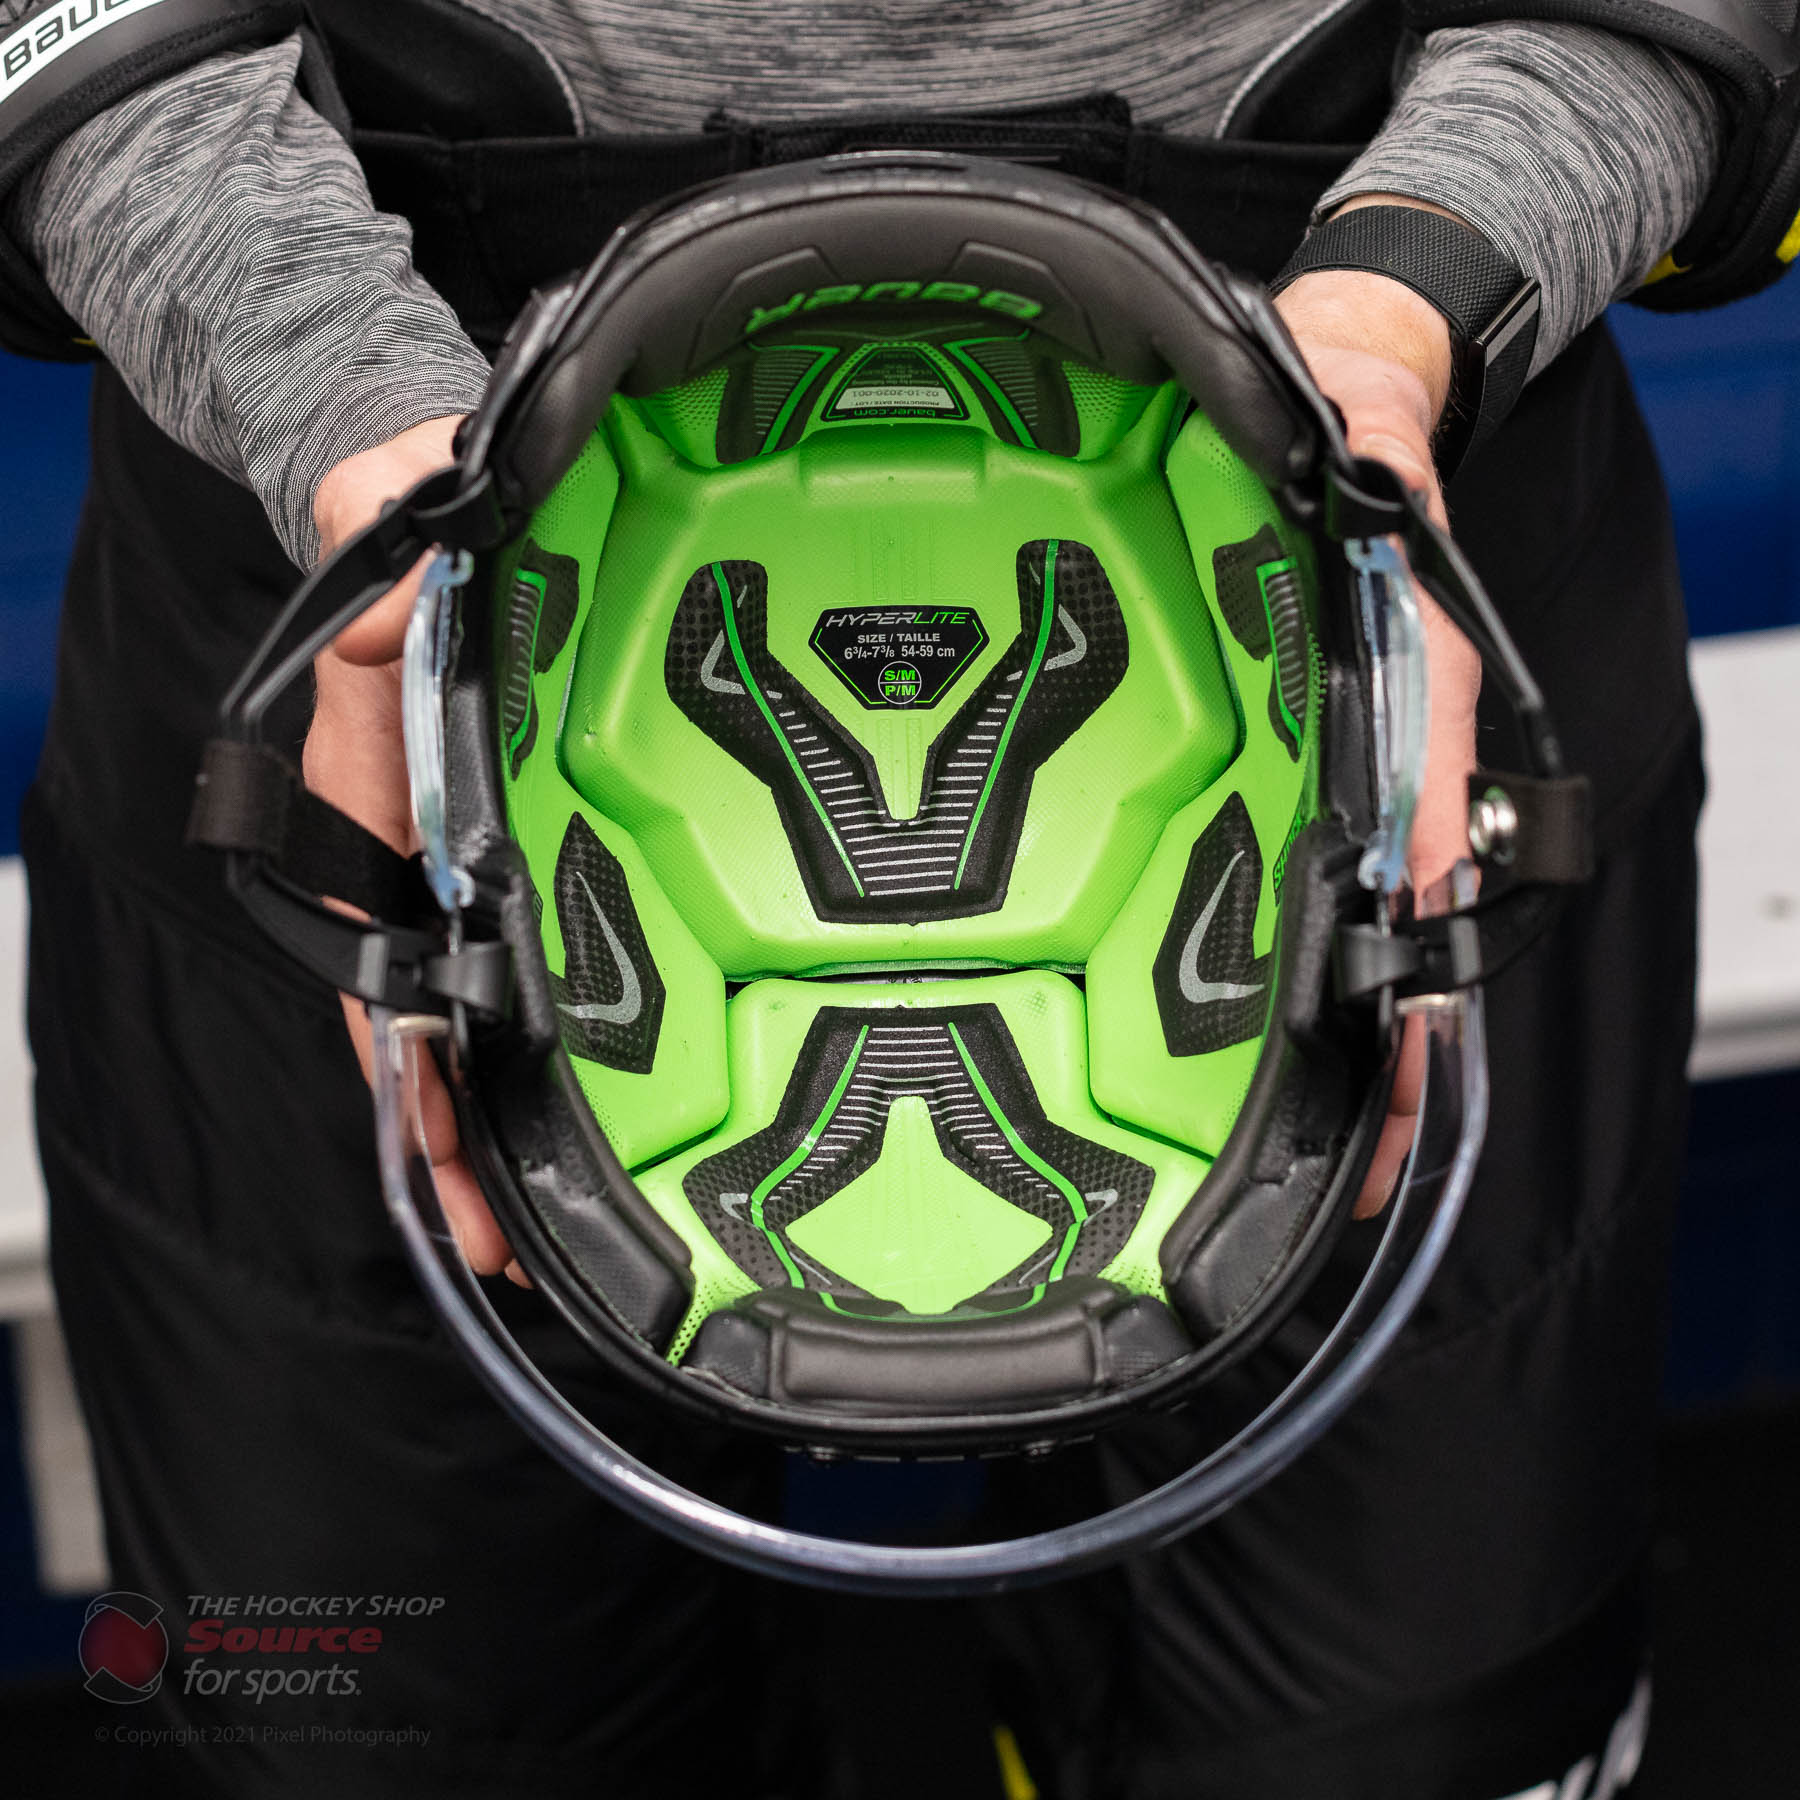 Bauer gets green light to make protective medical gear